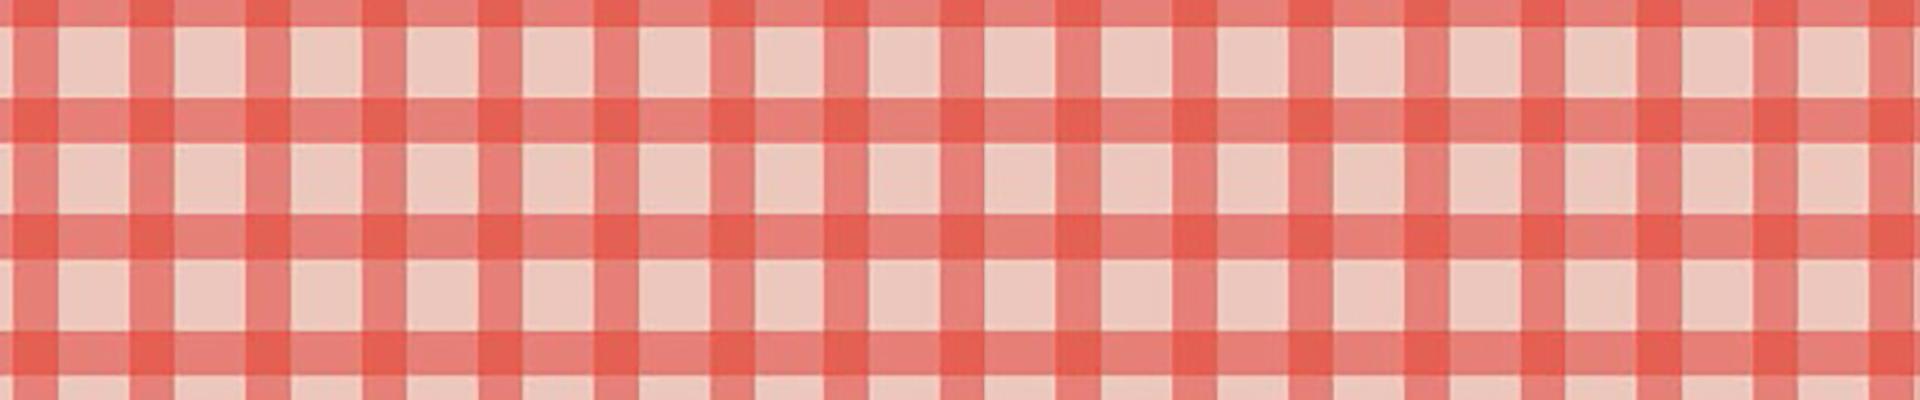 Red and blush pink gingham pattern